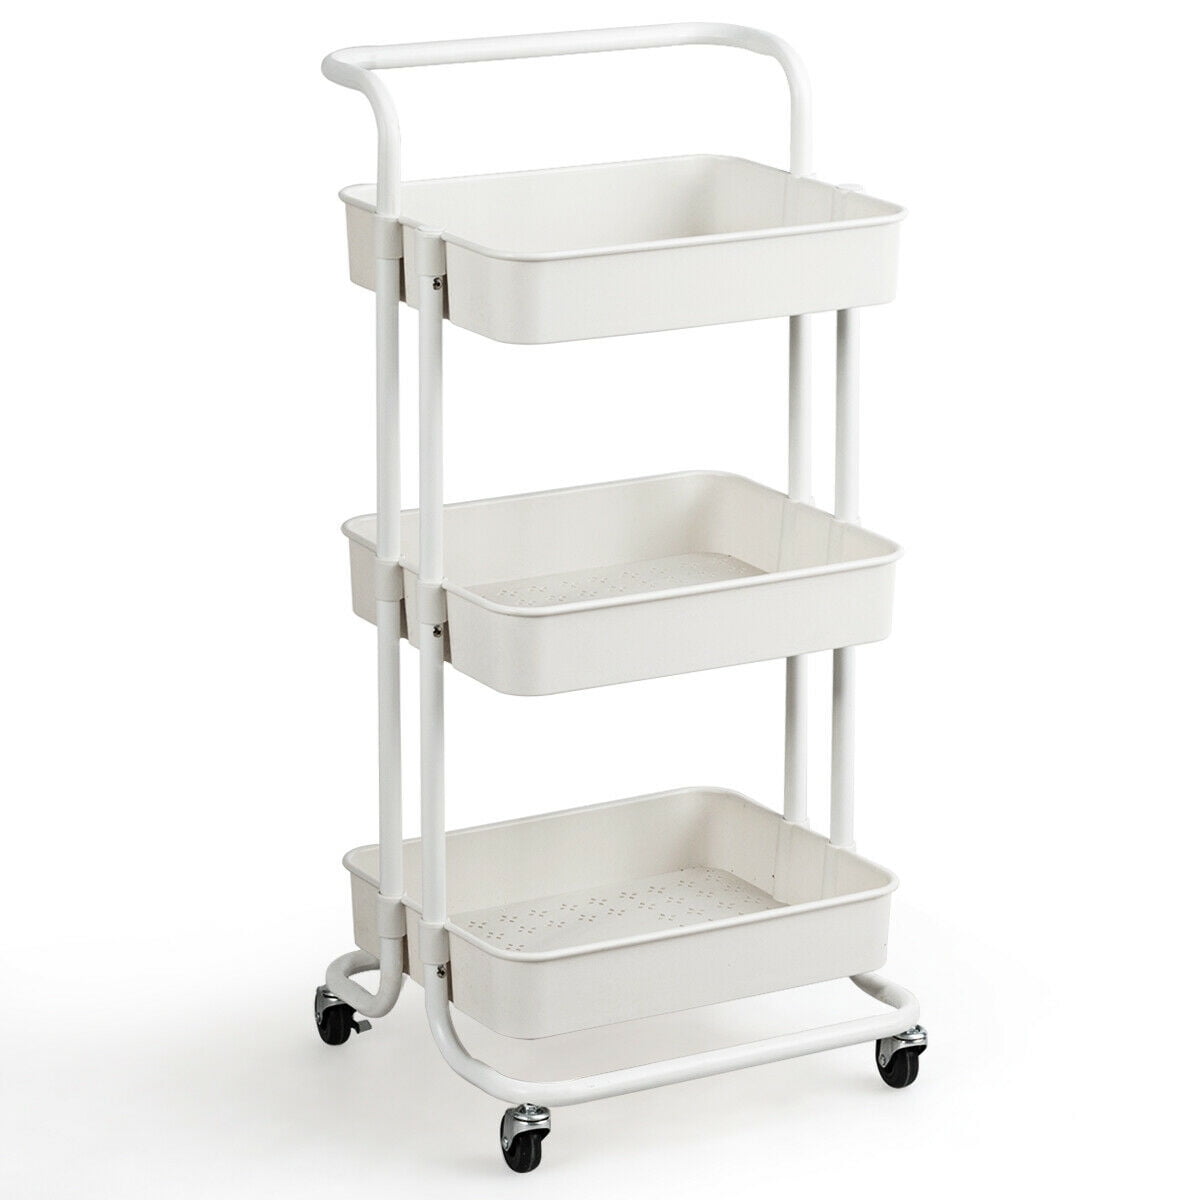 Mainstays 3 Tier Metal Utility Cart, Arctic White, Easy Rolling, Indoor, Adult and Child